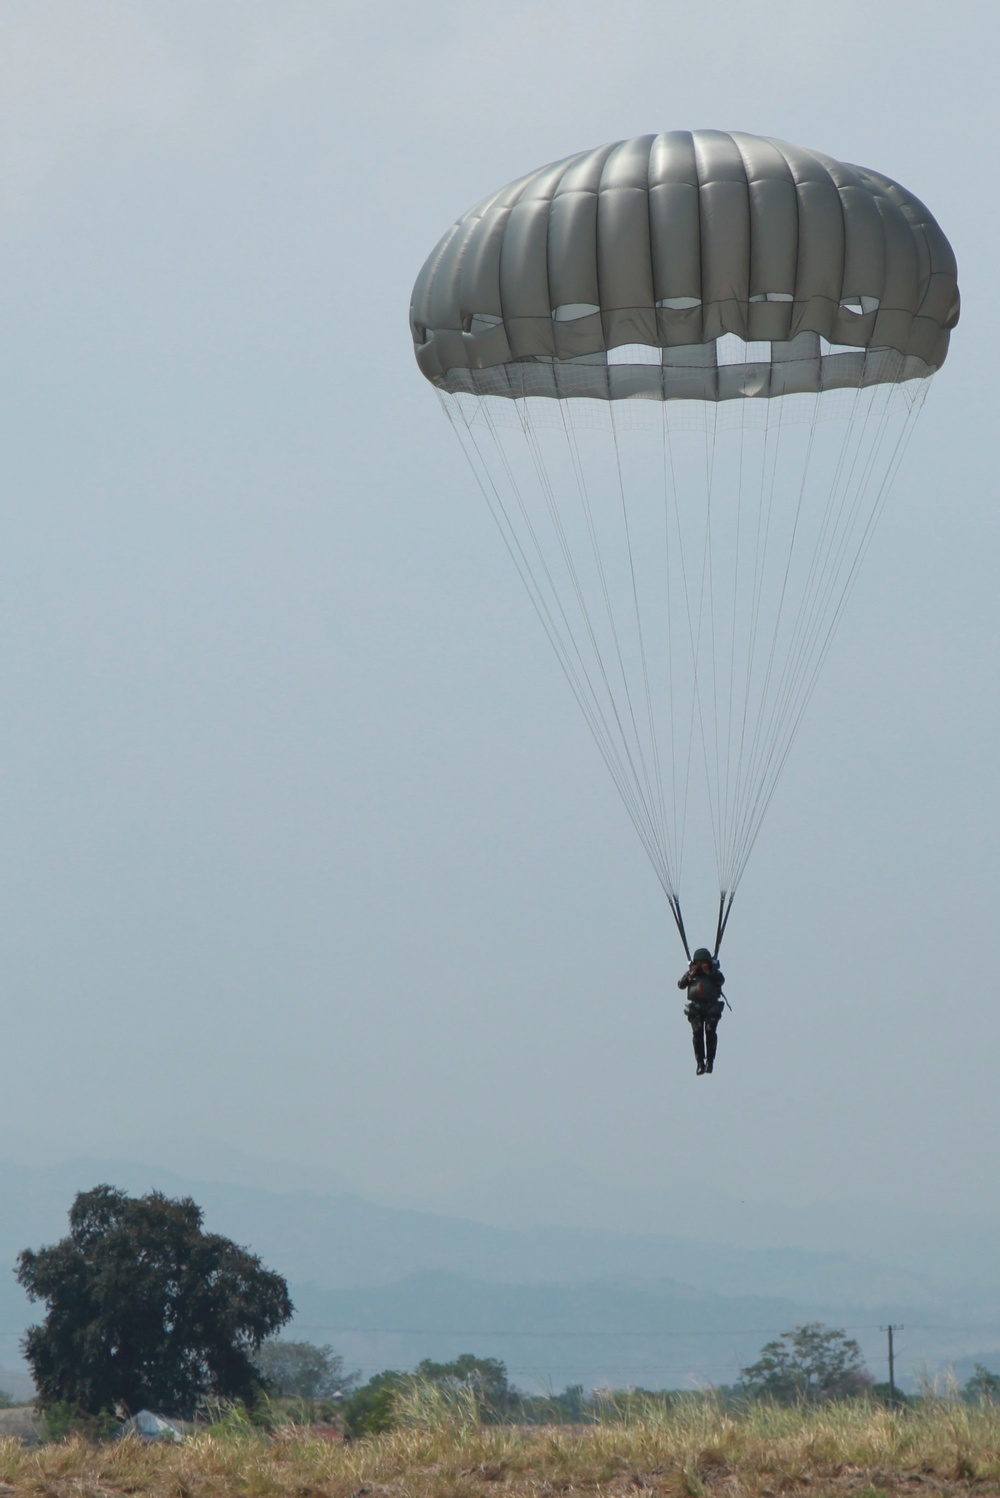 U.S. Special Forces, Armed Forces of the Philippines conduct airborne operation